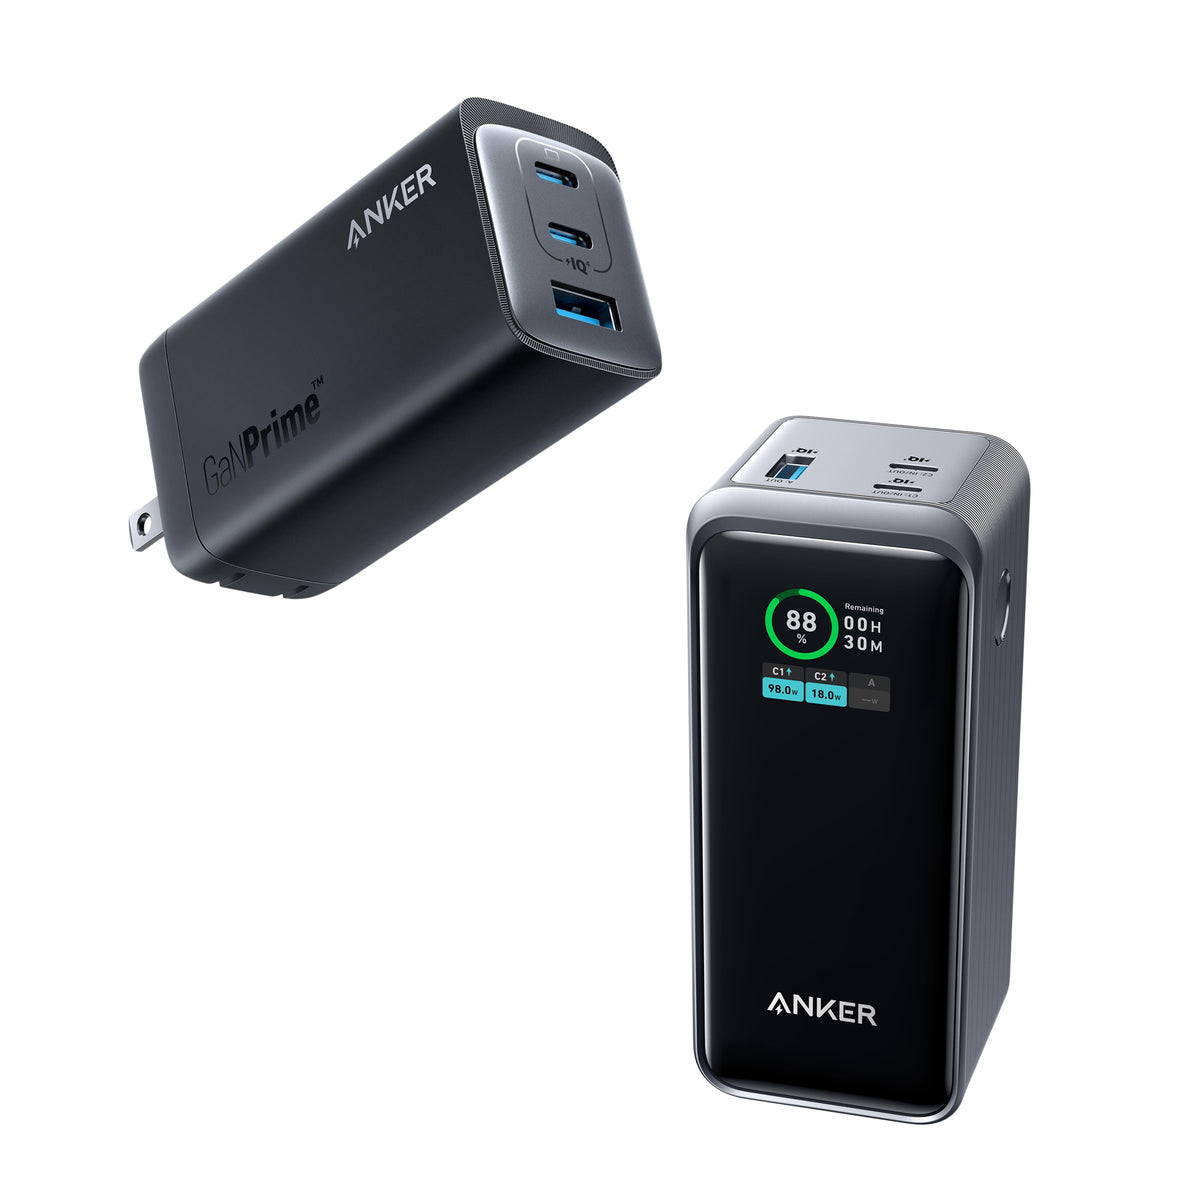 Anker Prime 20,000mAh Power Bank (200W) and Anker 737 Charger (GaNPrime 120W)